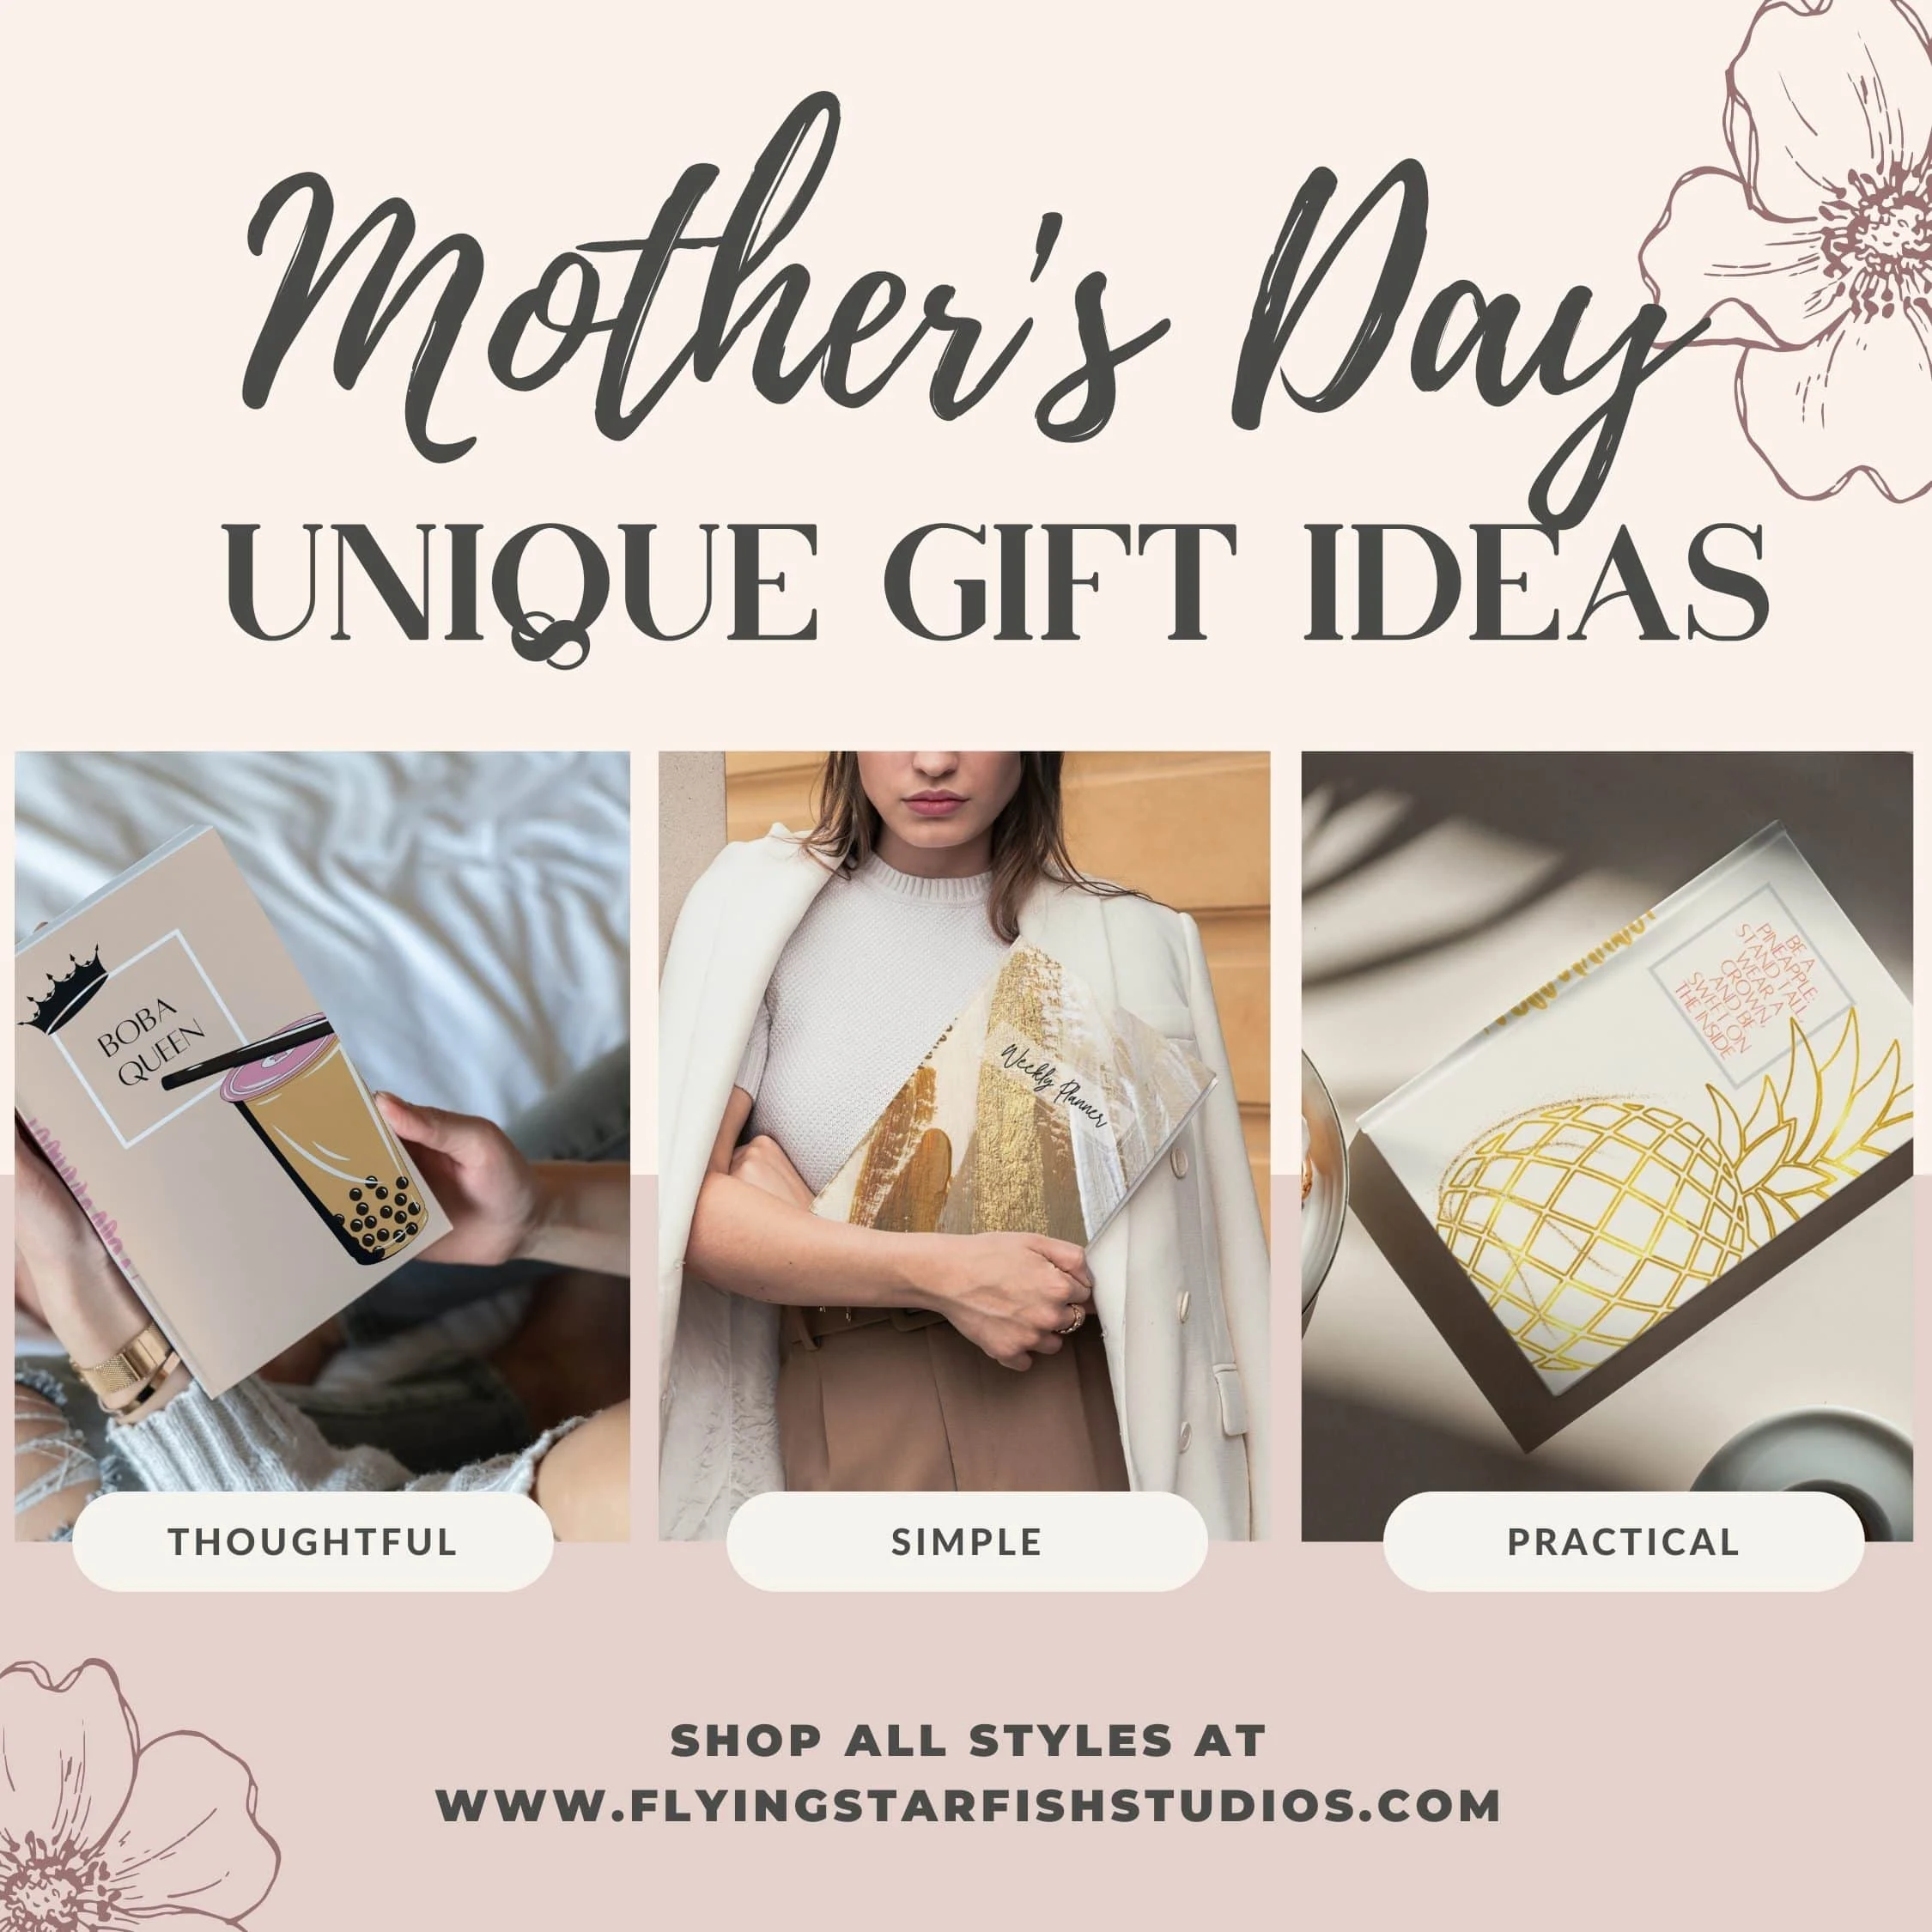 10 Unique Gift Ideas for Mother's Day: Thoughtful, Simple, and Affordable